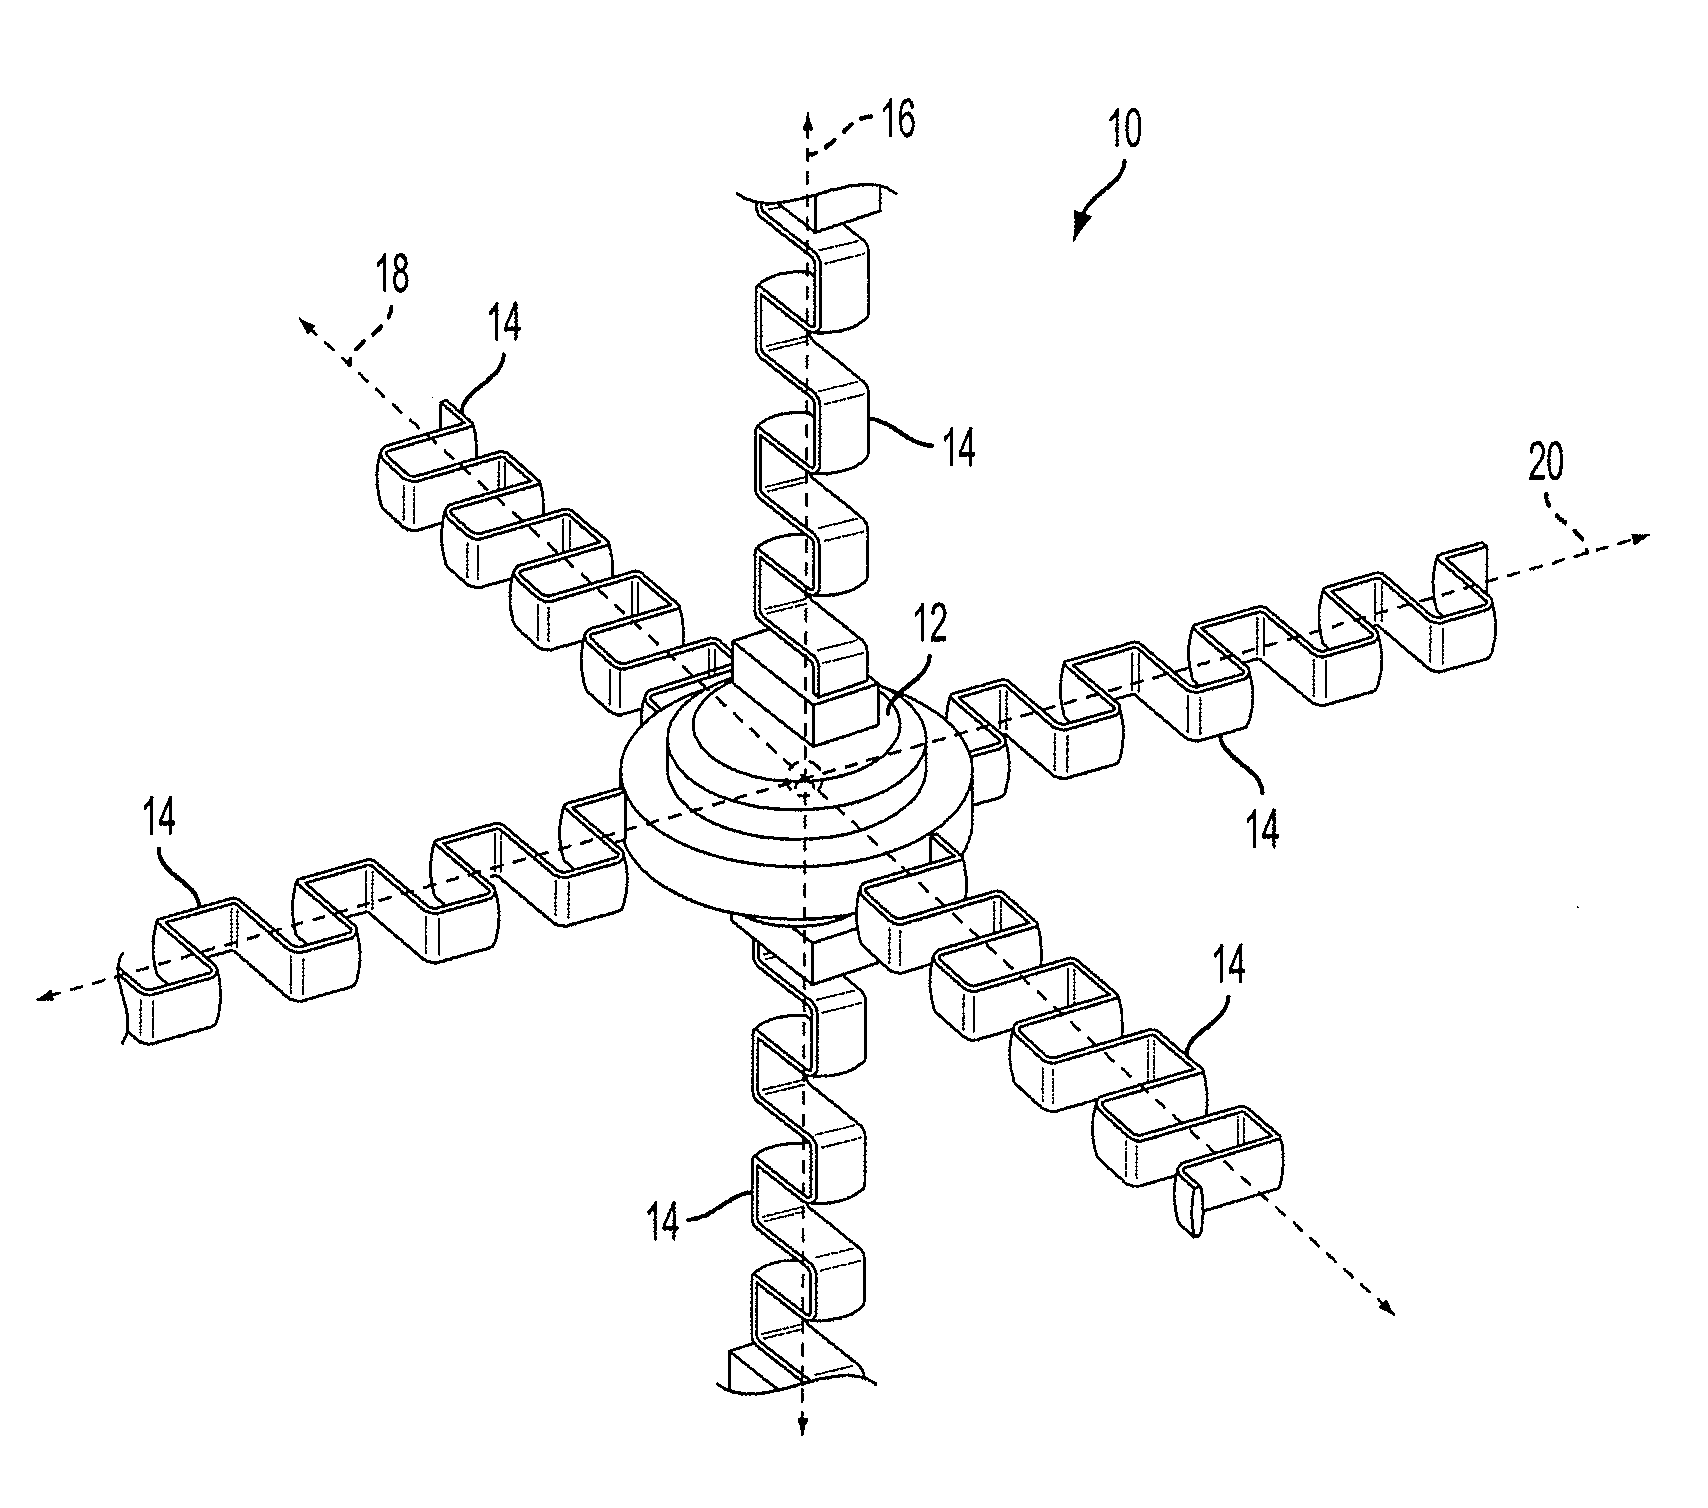 Apparatus and method for providing acoustic metamaterial